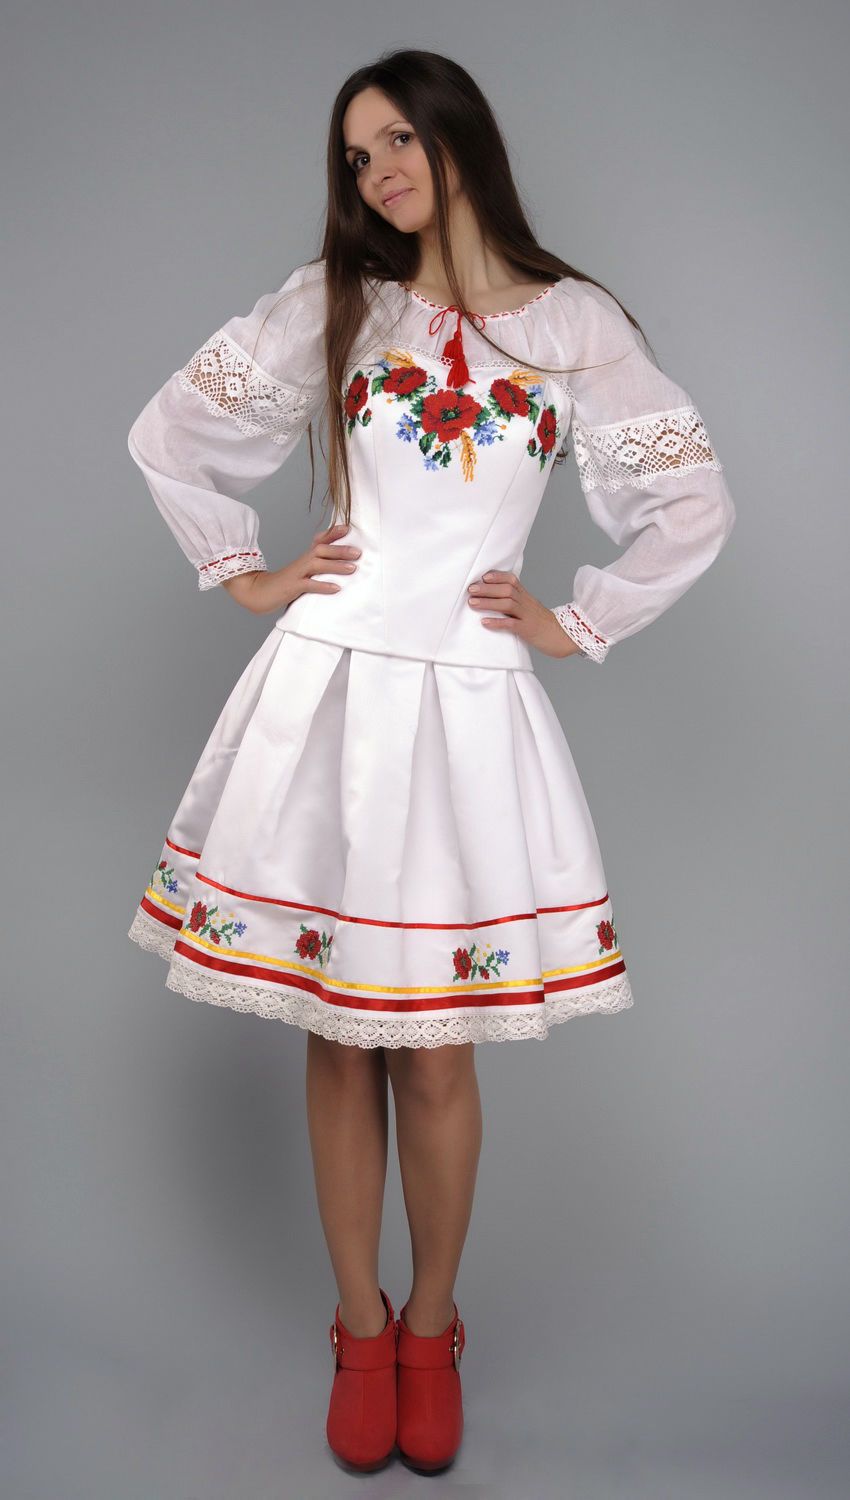 Costume in ethnic style: skirt, blouse and corset photo 1